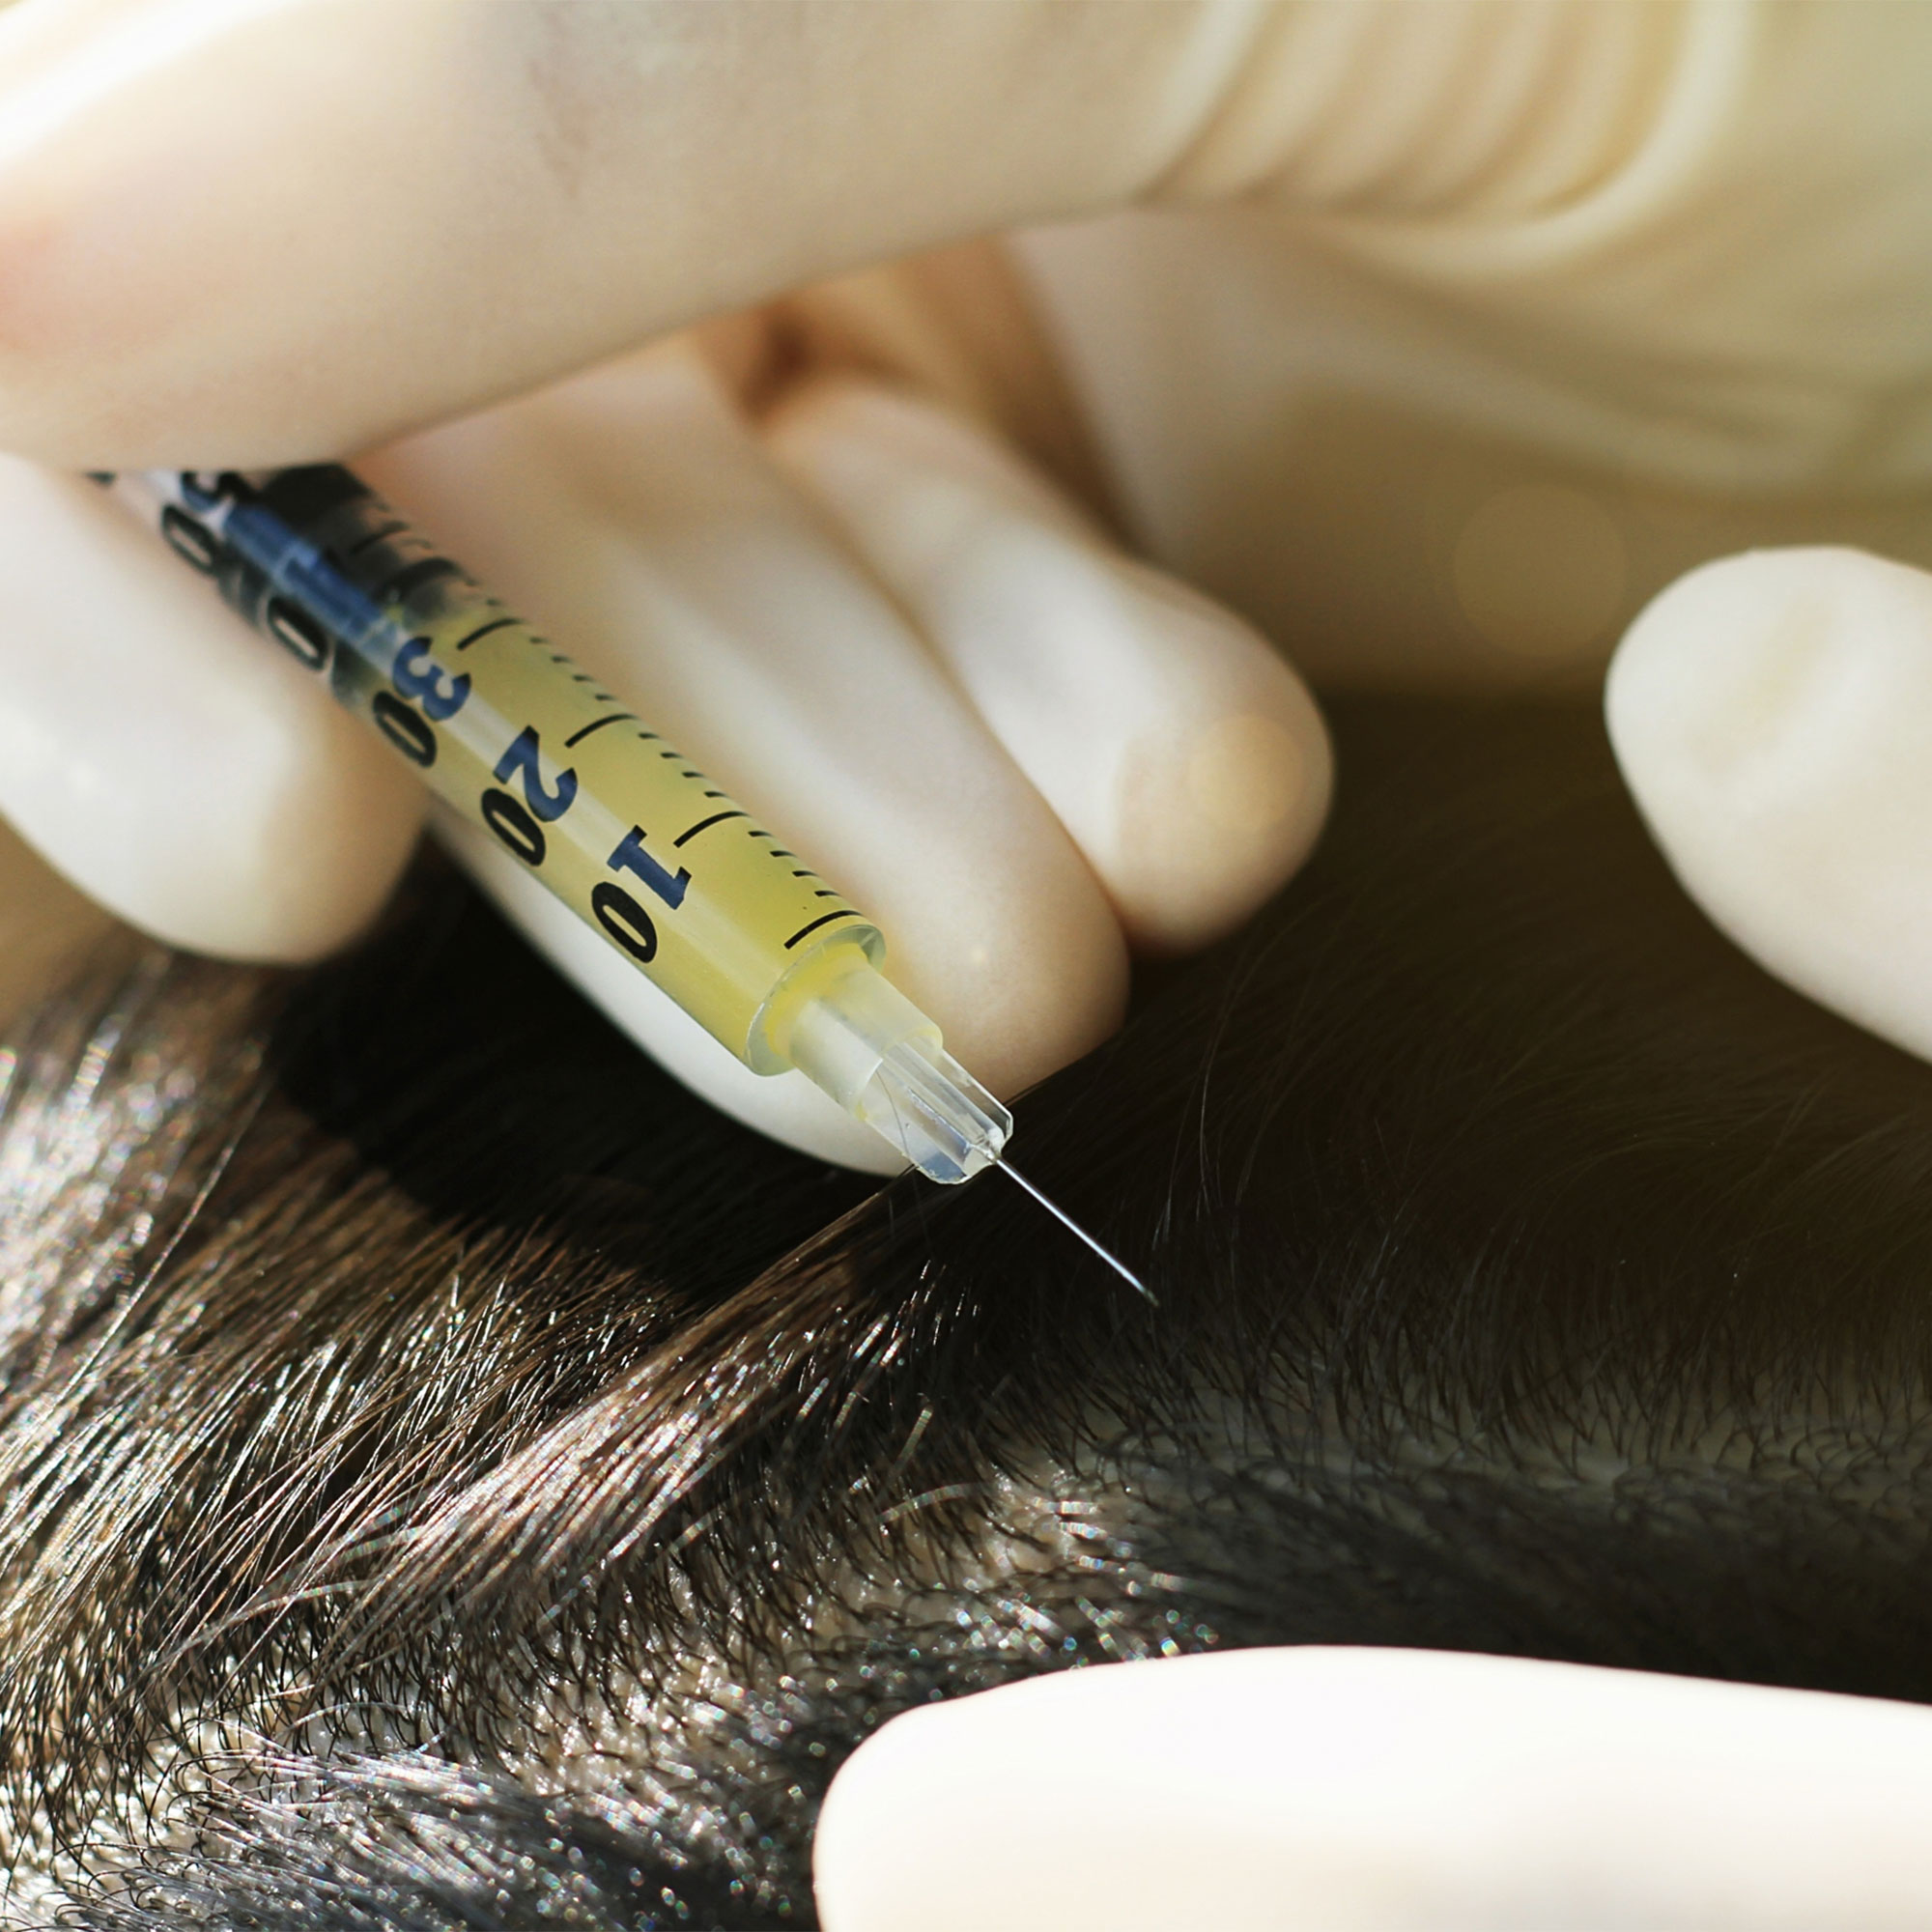 Is your hair loss happening due to steroids? | Dr Batra's™